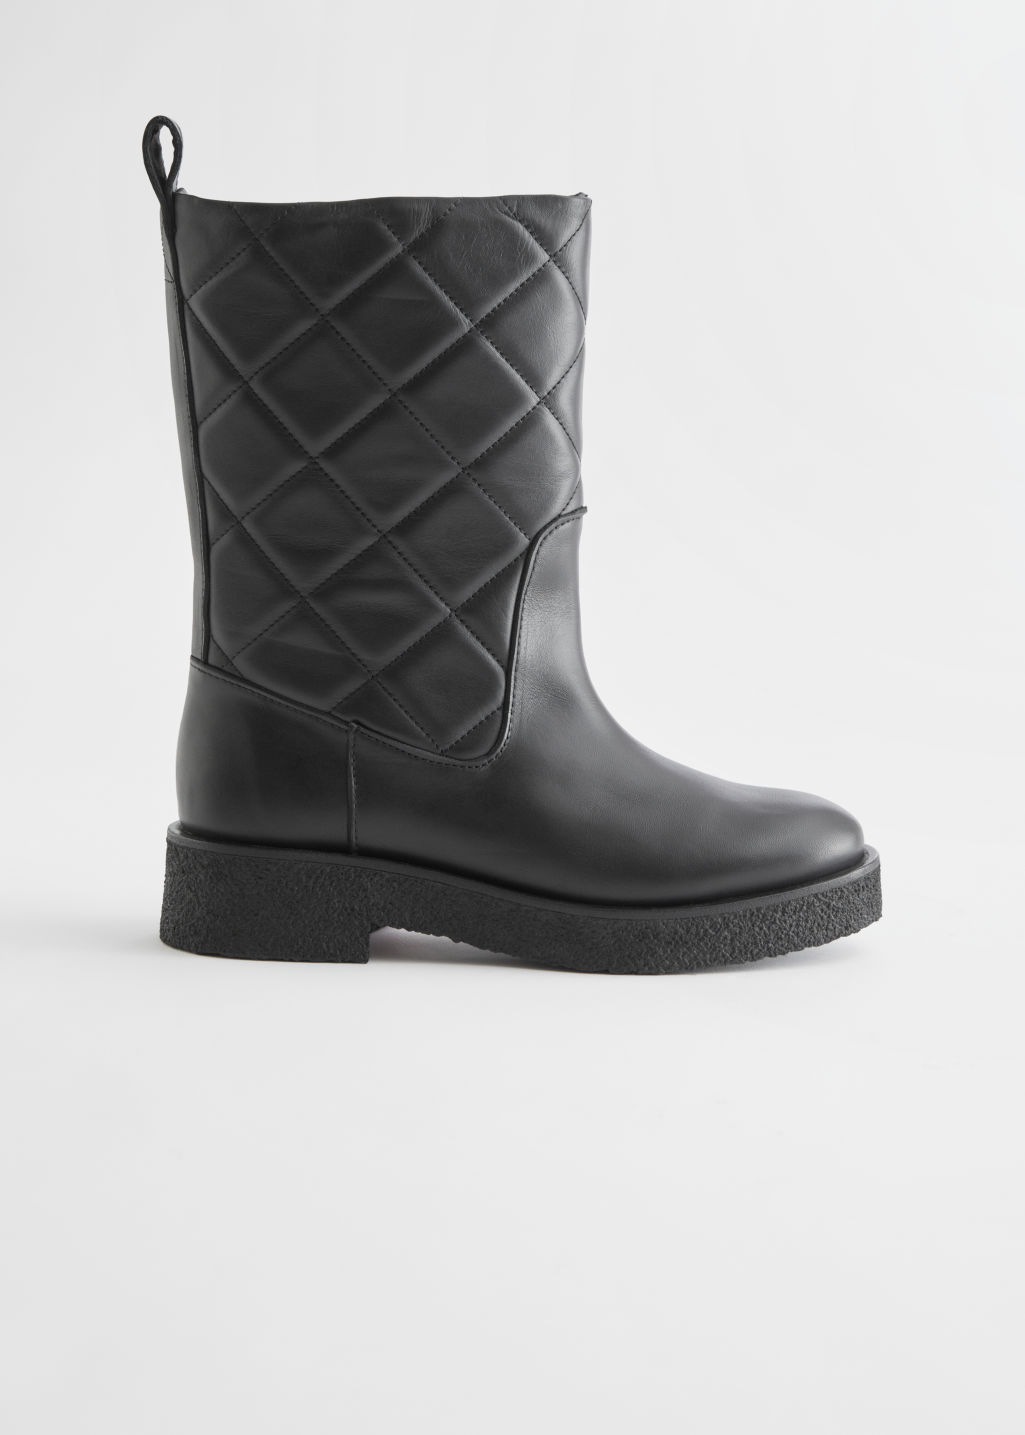 Diamond Quilted Leather Boots - Black - Winterboots - & Other Stories